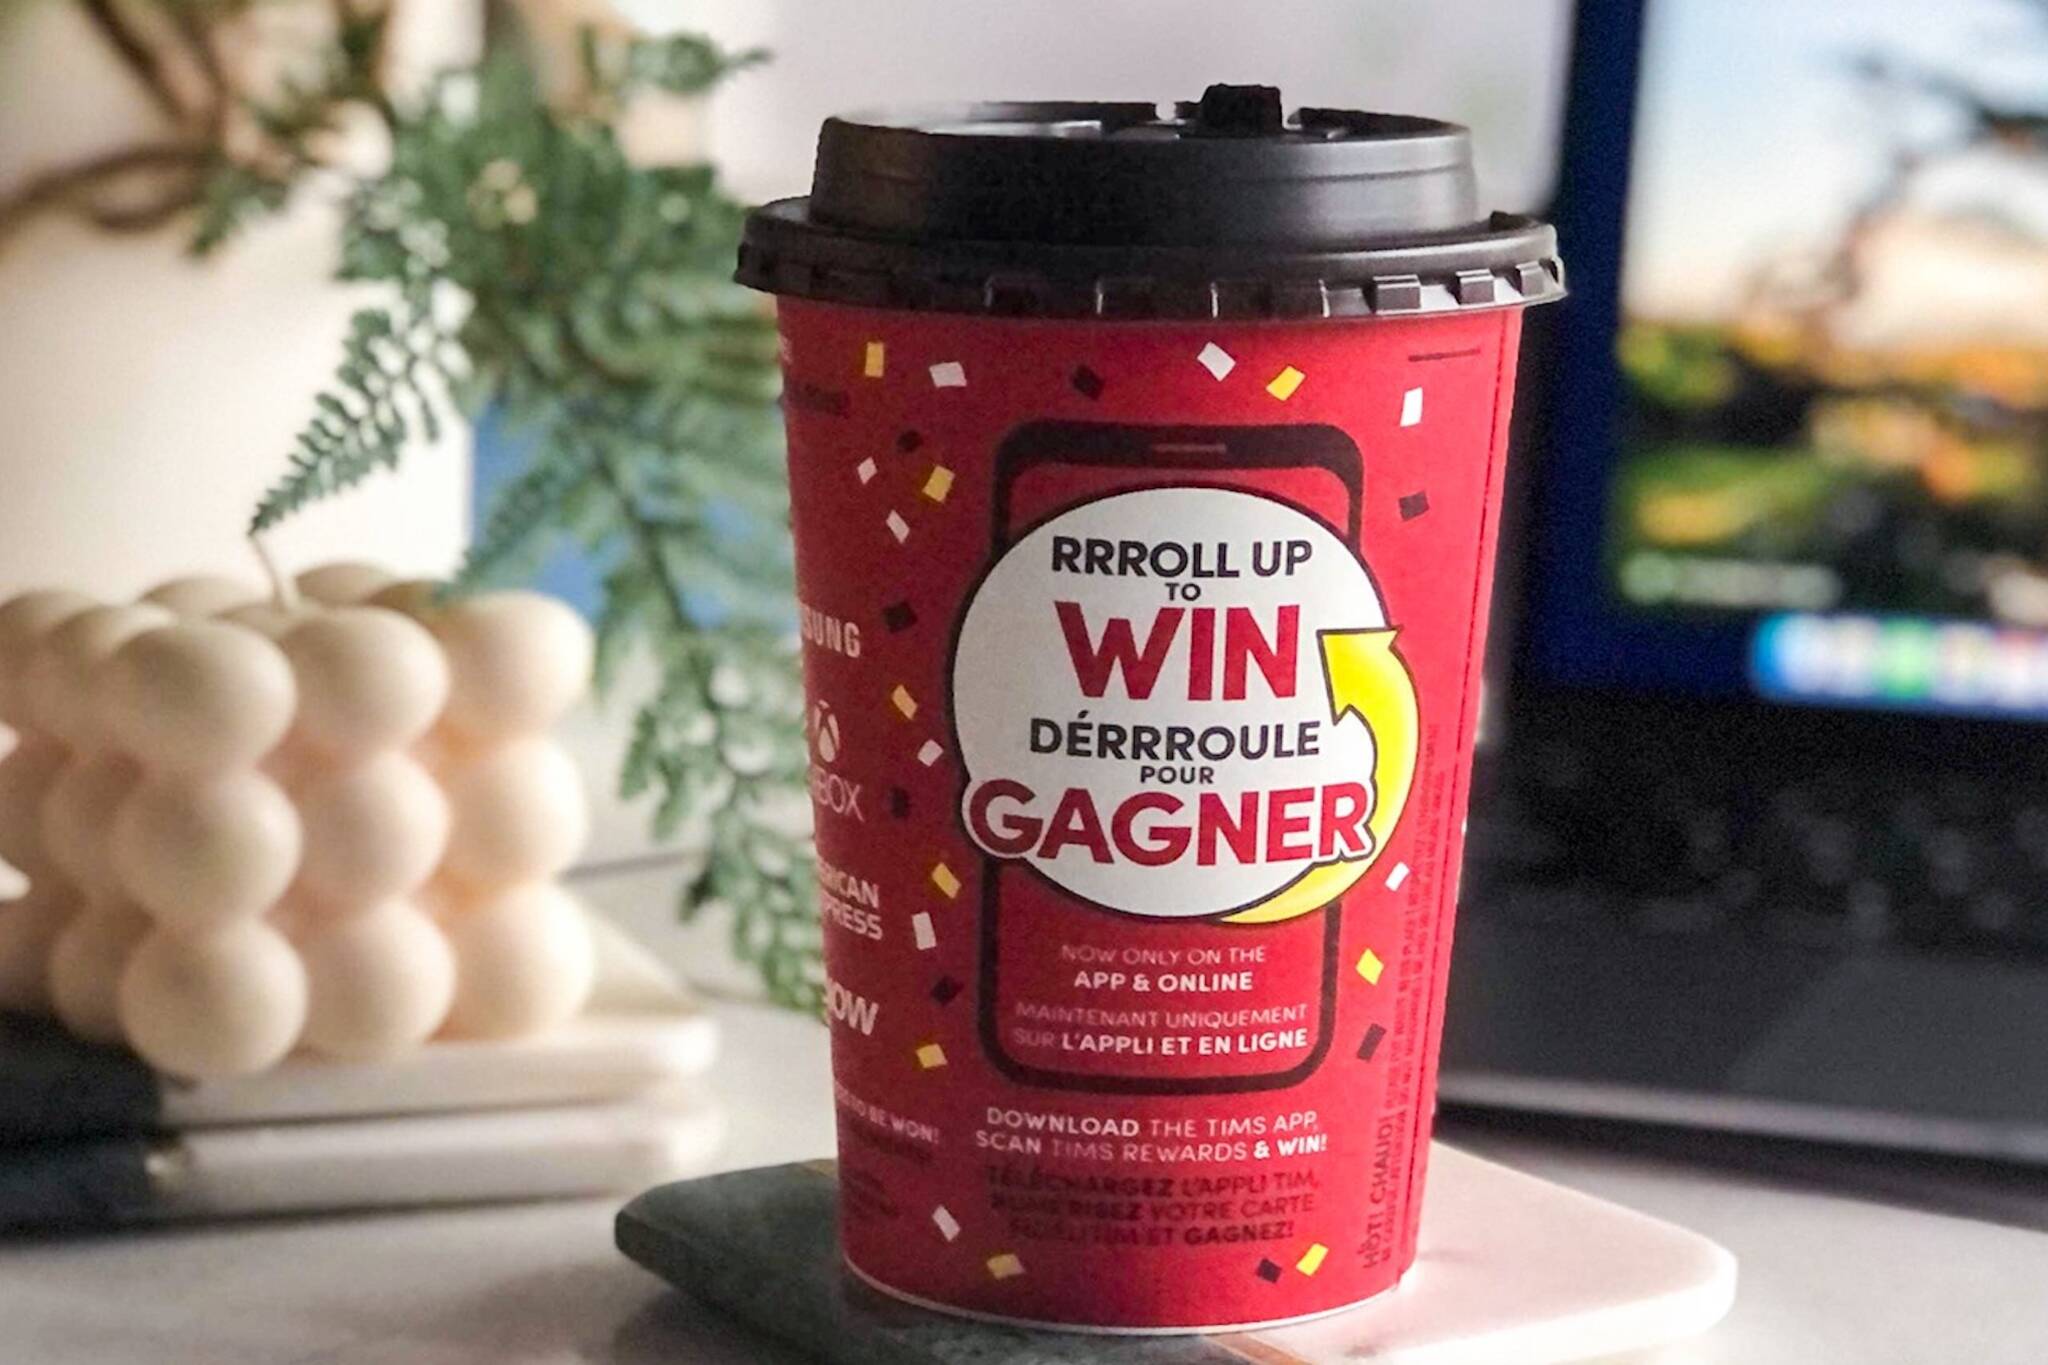 People are still confused about Tim Horton's Roll up the Rim cups